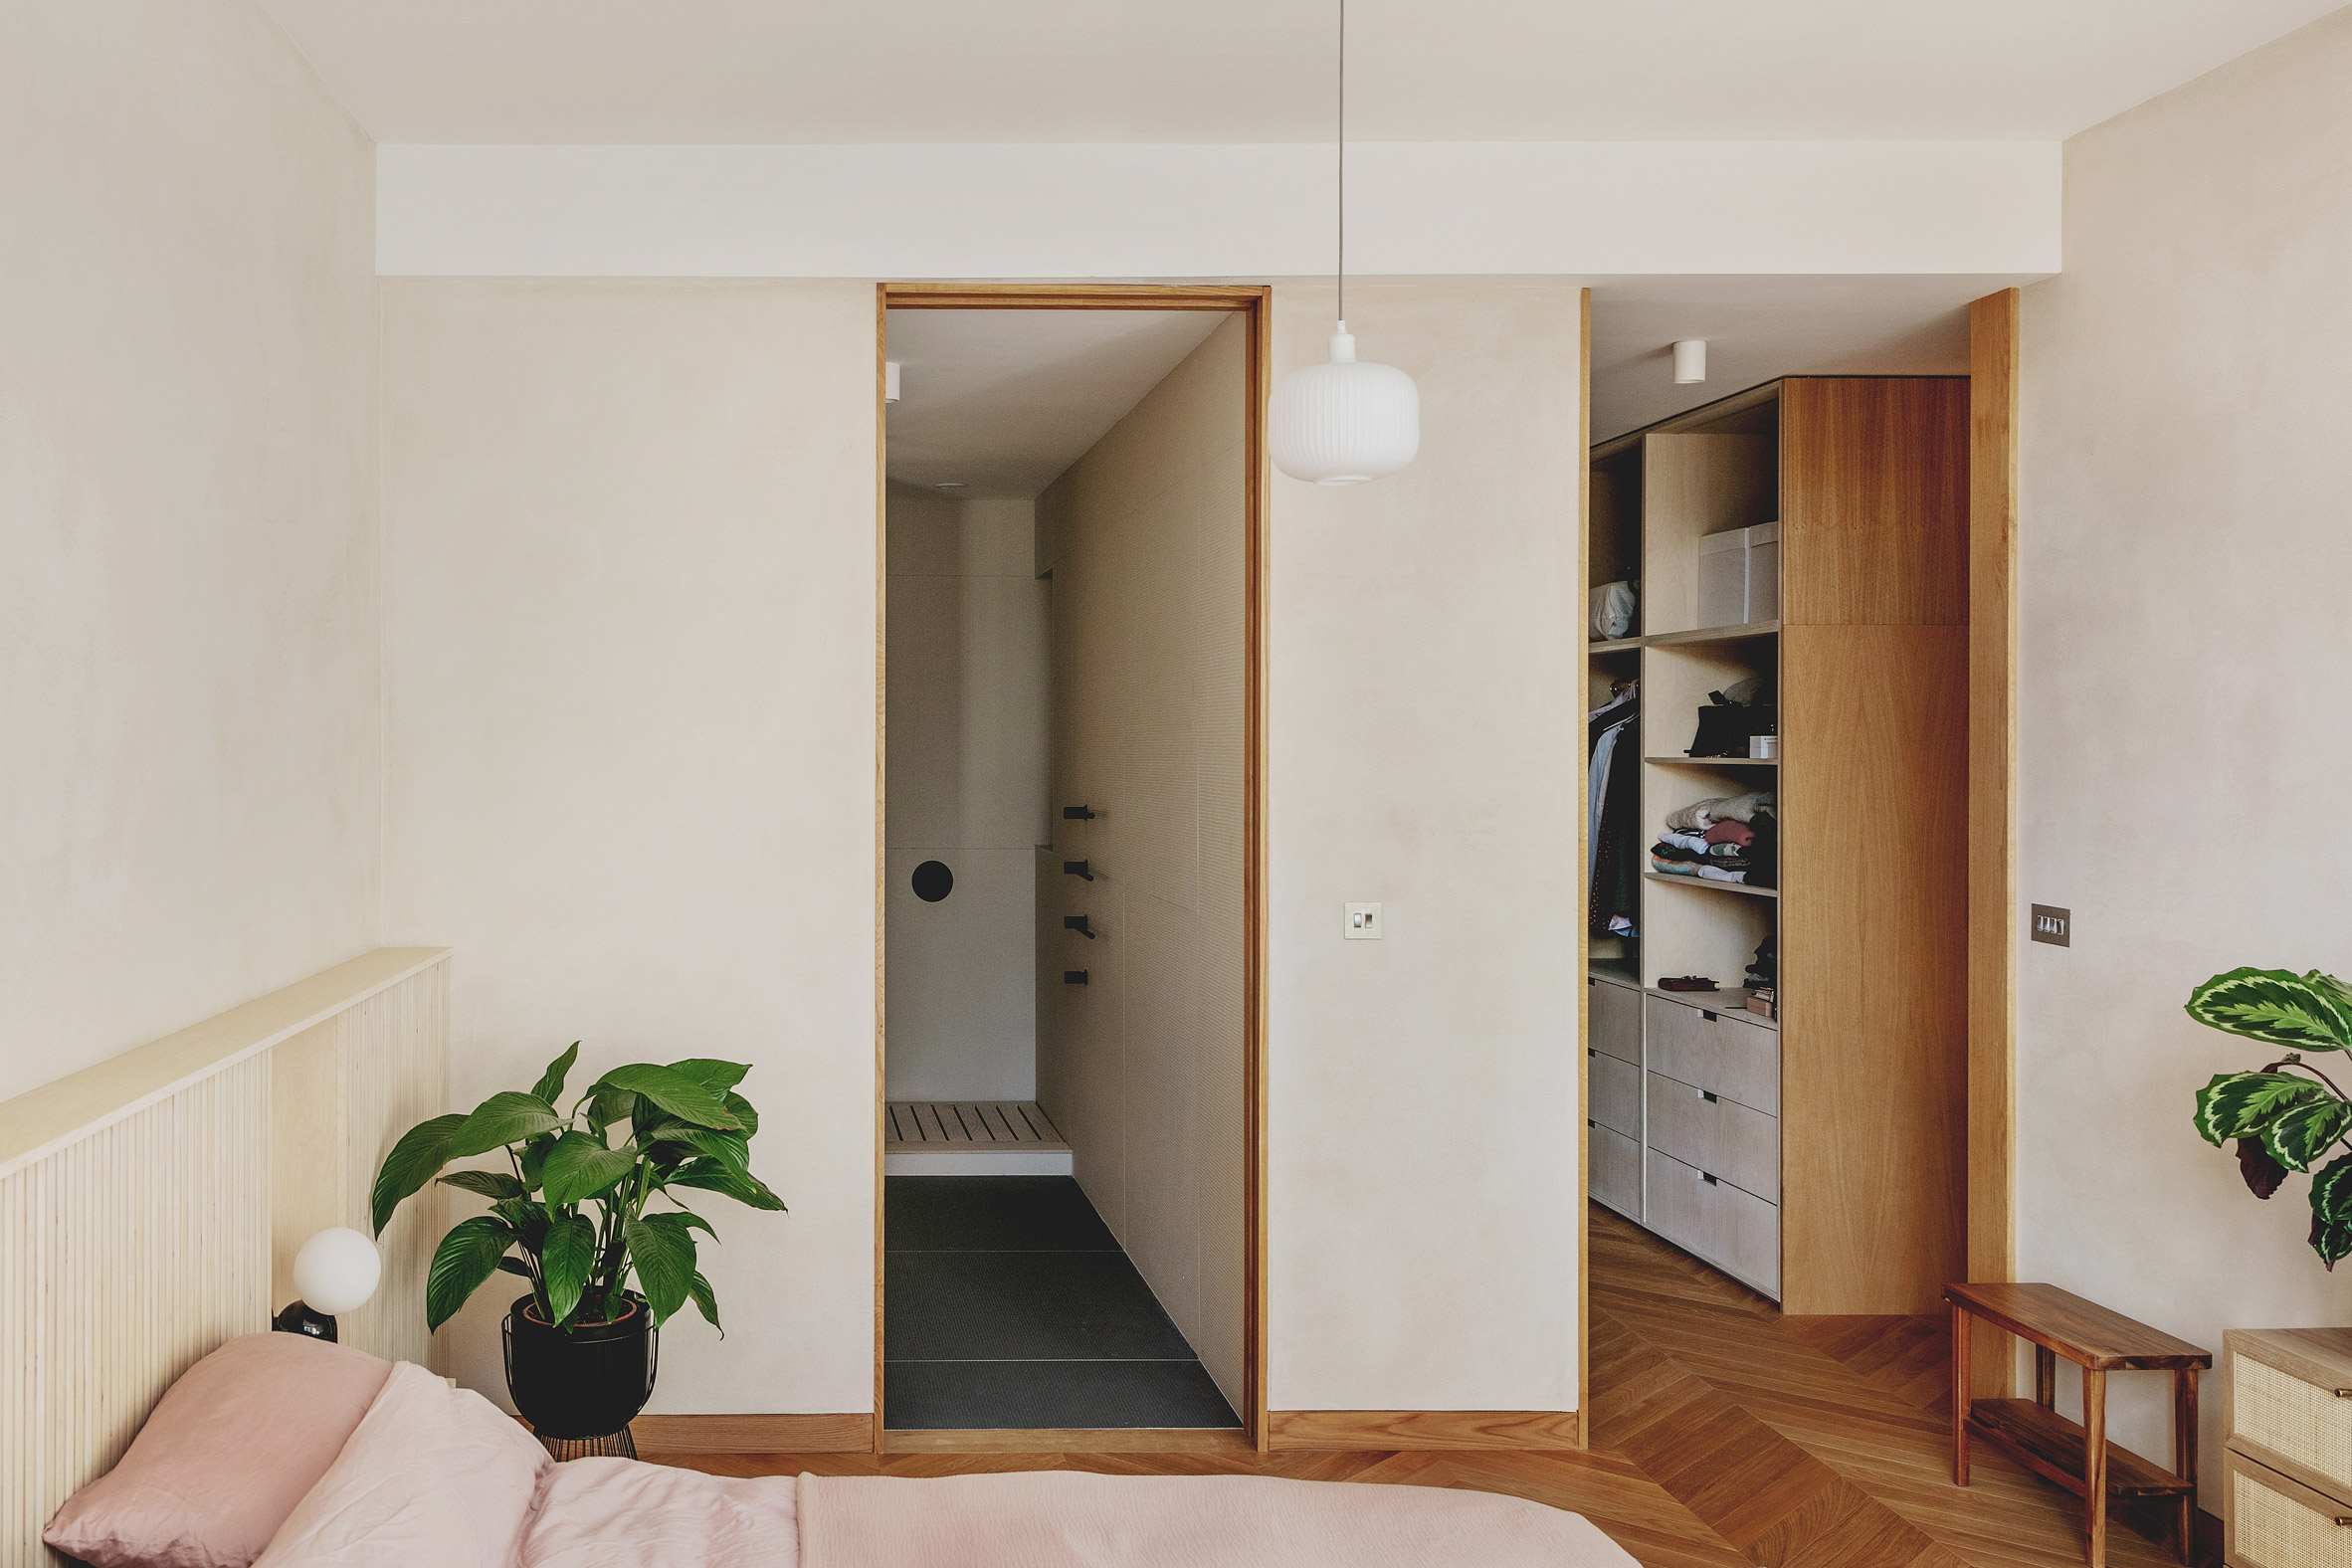 Main bedroom with en-suite and walk-in-wardrobe in St John Street warehouse apartment by Emil Eve Architects